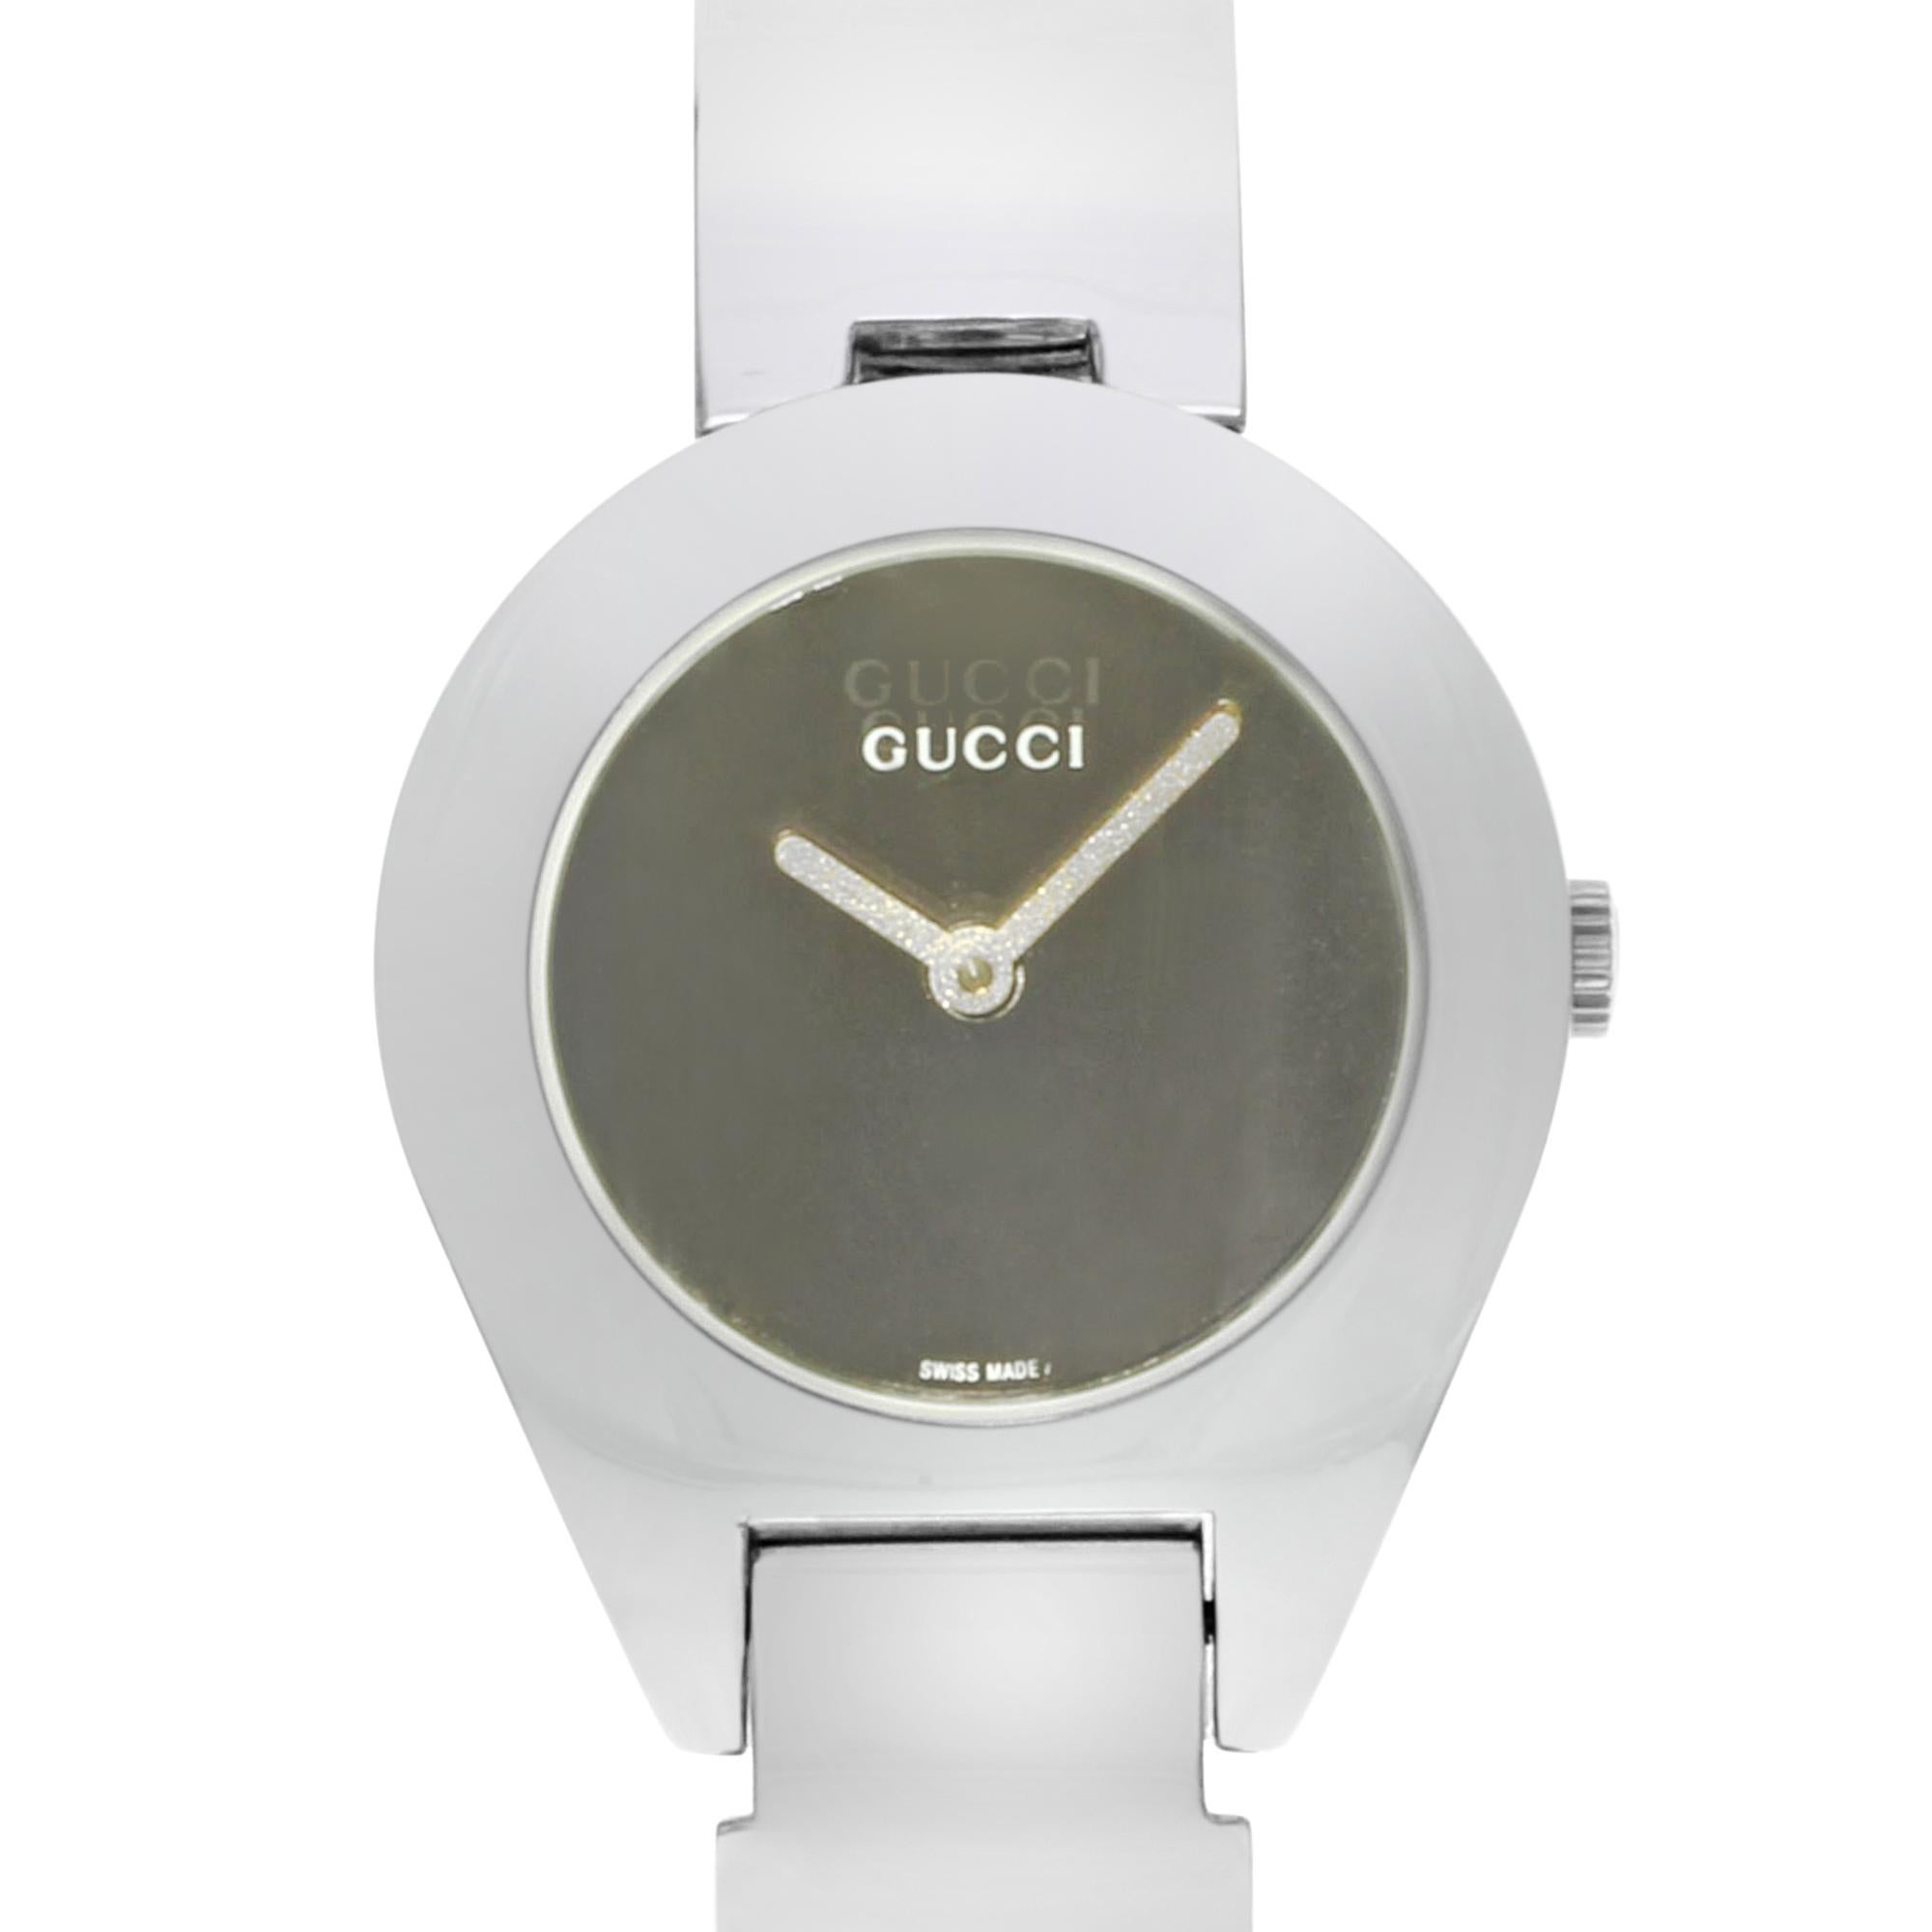 This display model Gucci 6700 L YA067504 is a beautiful Ladies timepiece that is powered by a quartz movement which is cased in a stainless steel case. It has a round shape face, no features dial and has hand unspecified style markers. It is